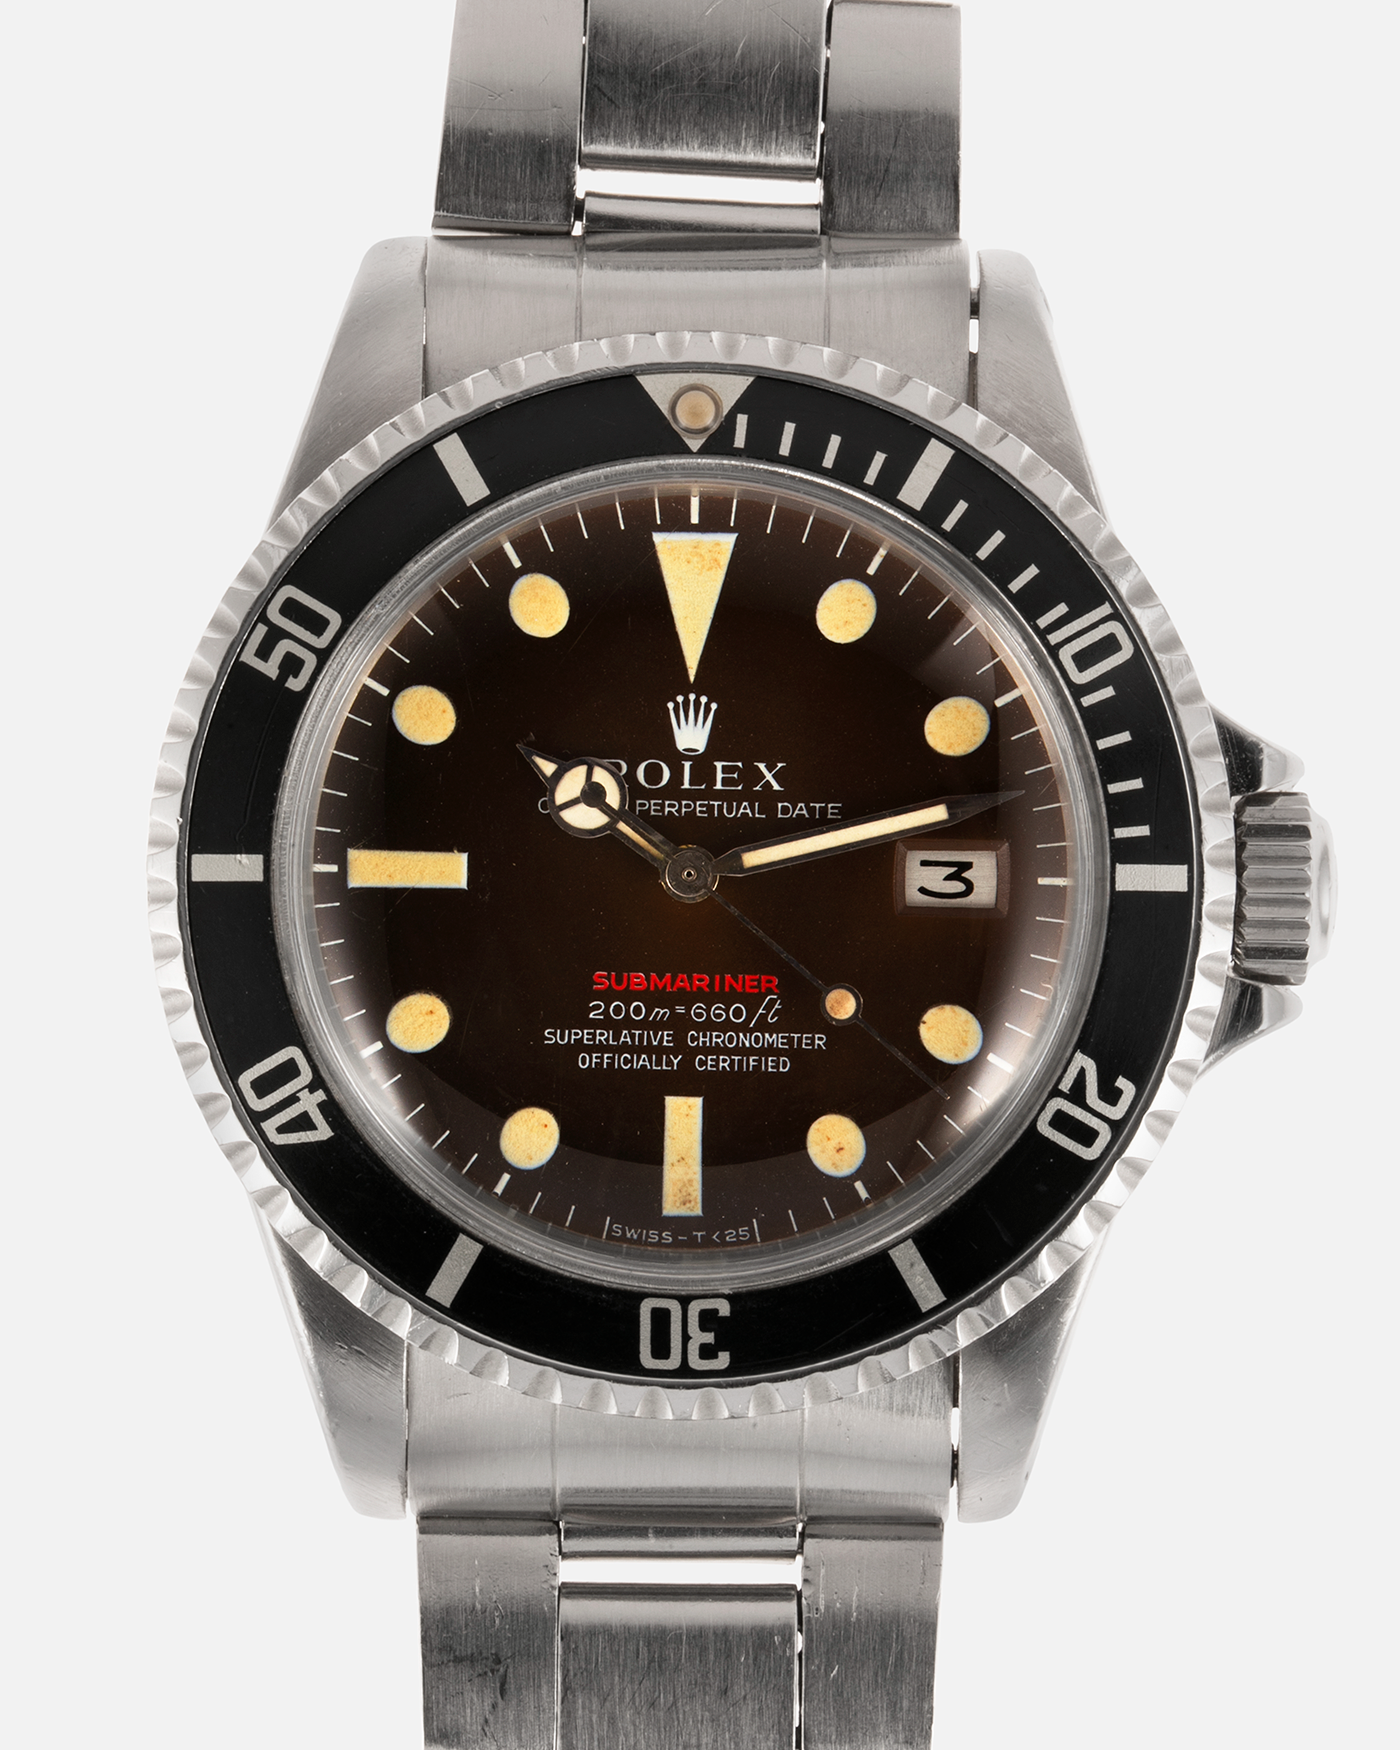 Rolex Red Submariner 1680 Tropical Mark 2 First Sport Watch S.Song Vintage Watches For Sale – S.Song